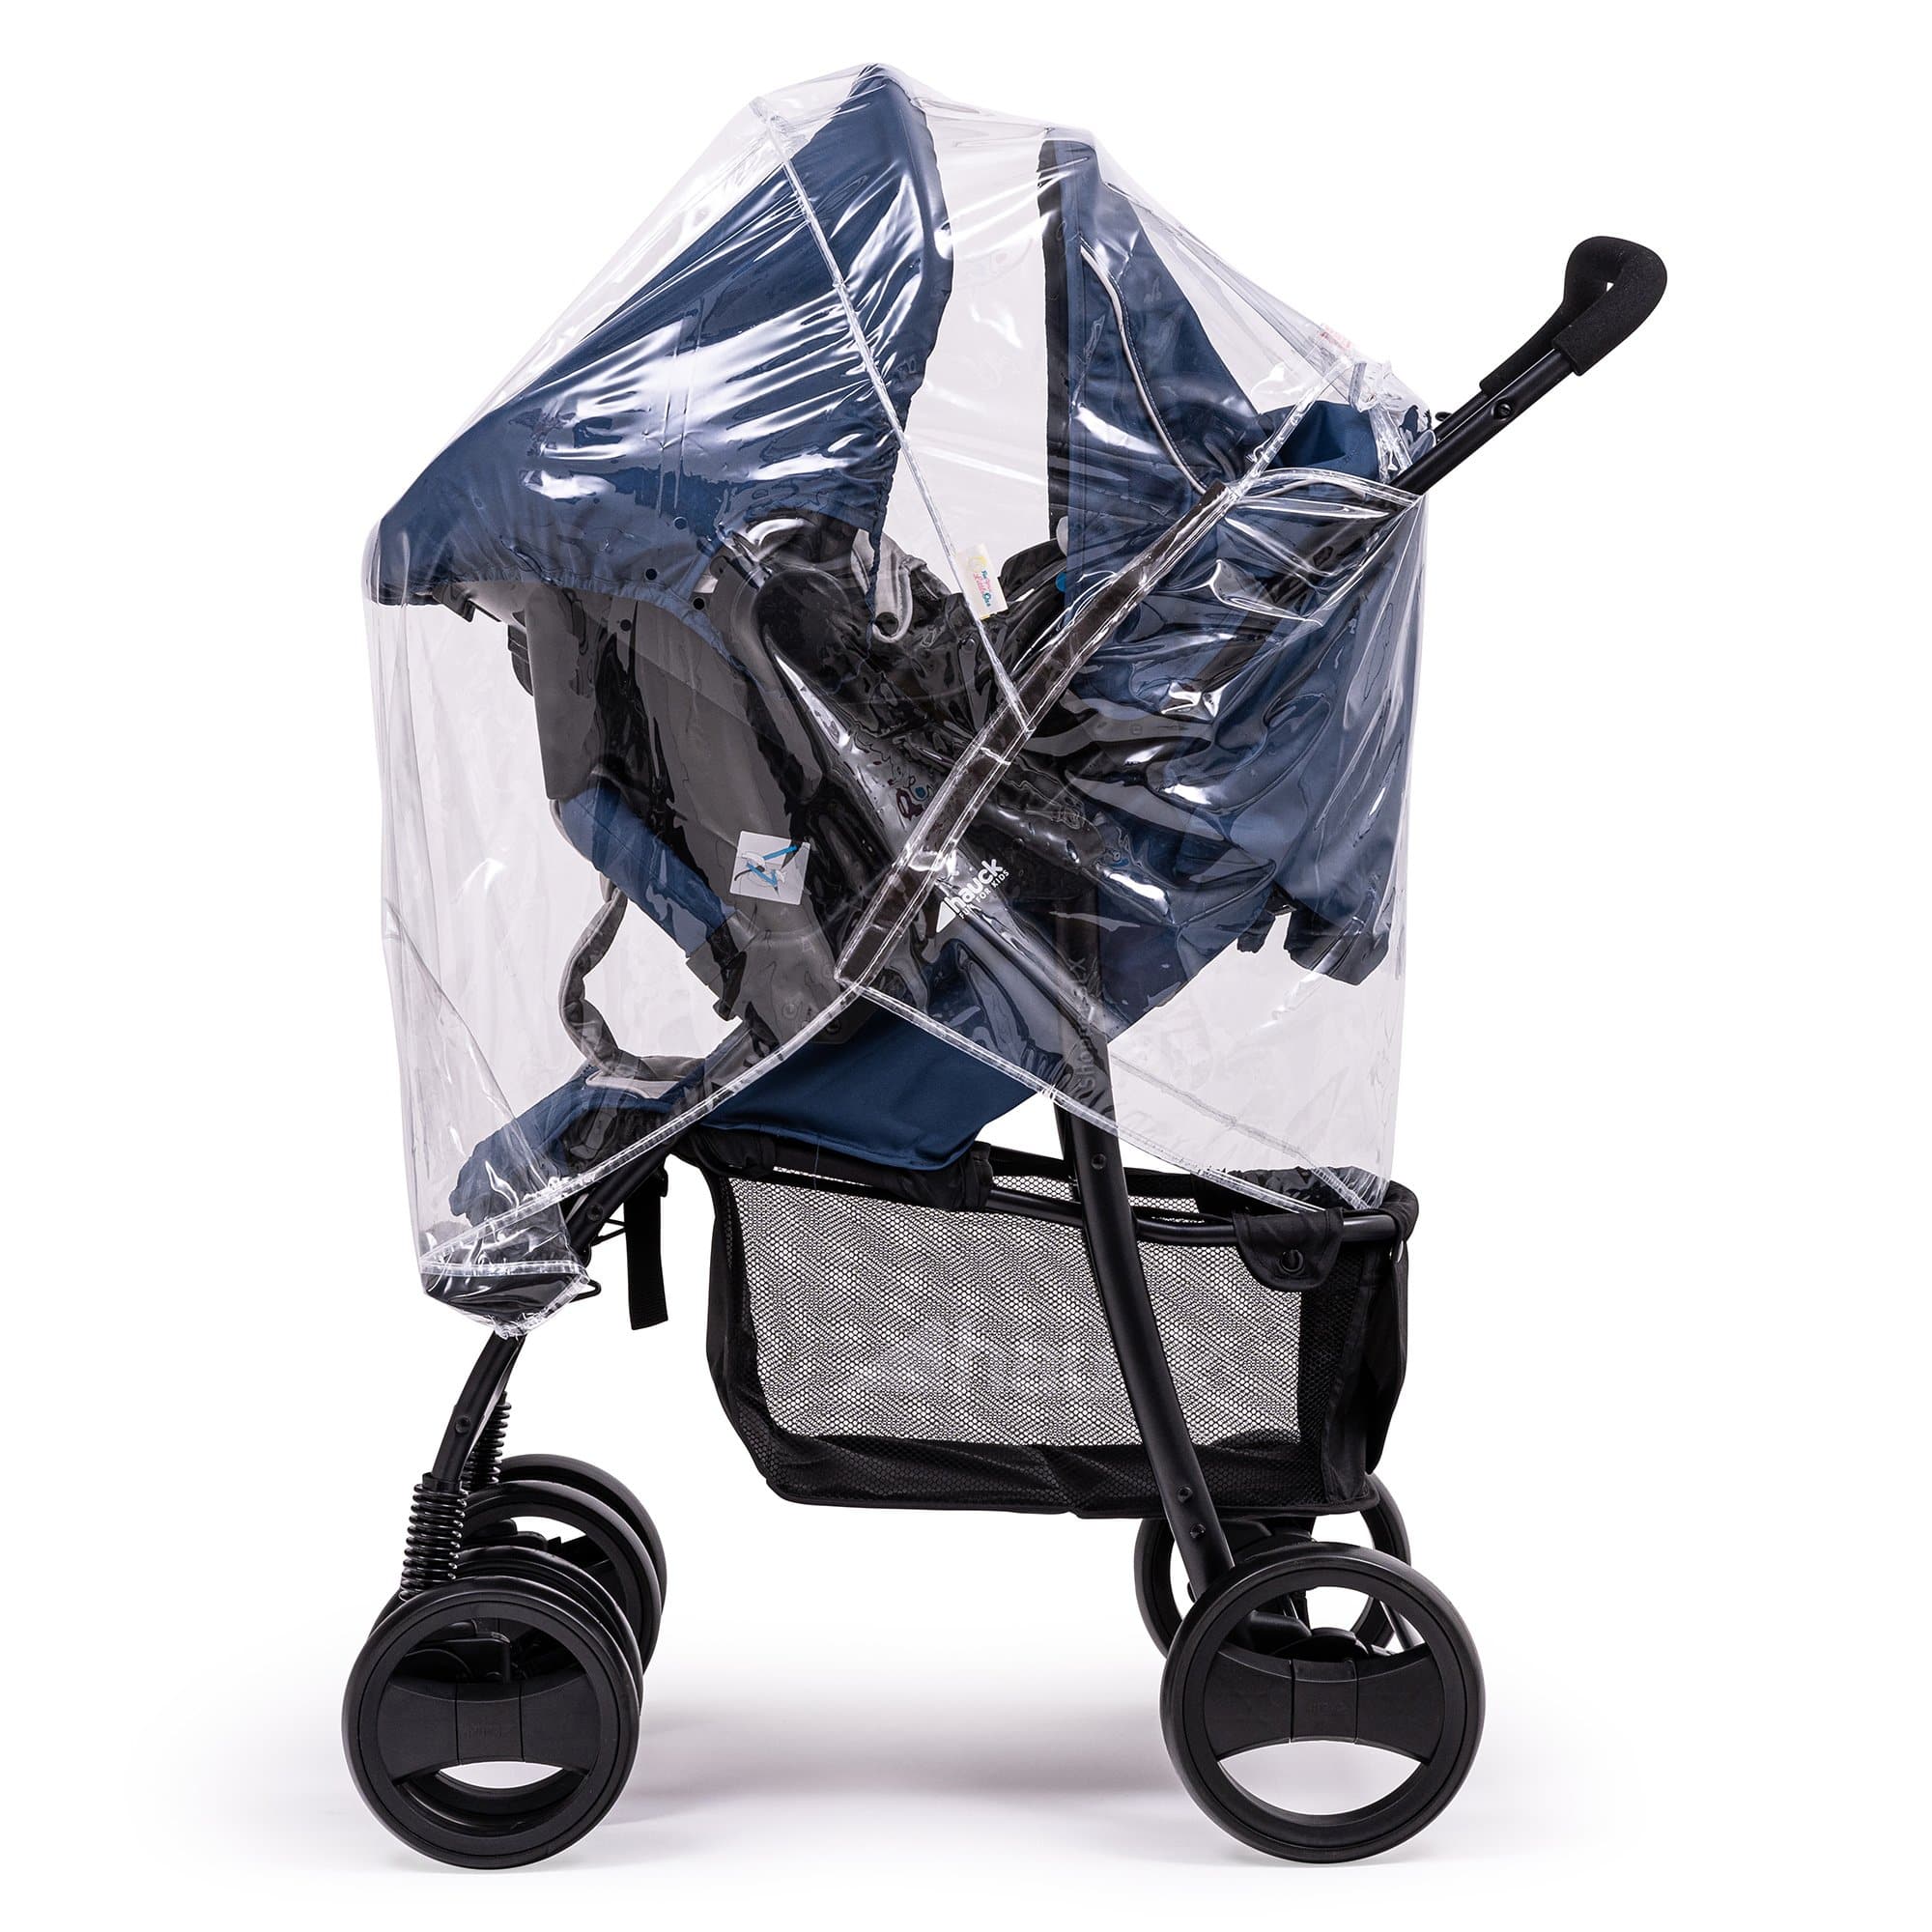 Universal Travel System Raincover - Fits All Models - For Your Little One